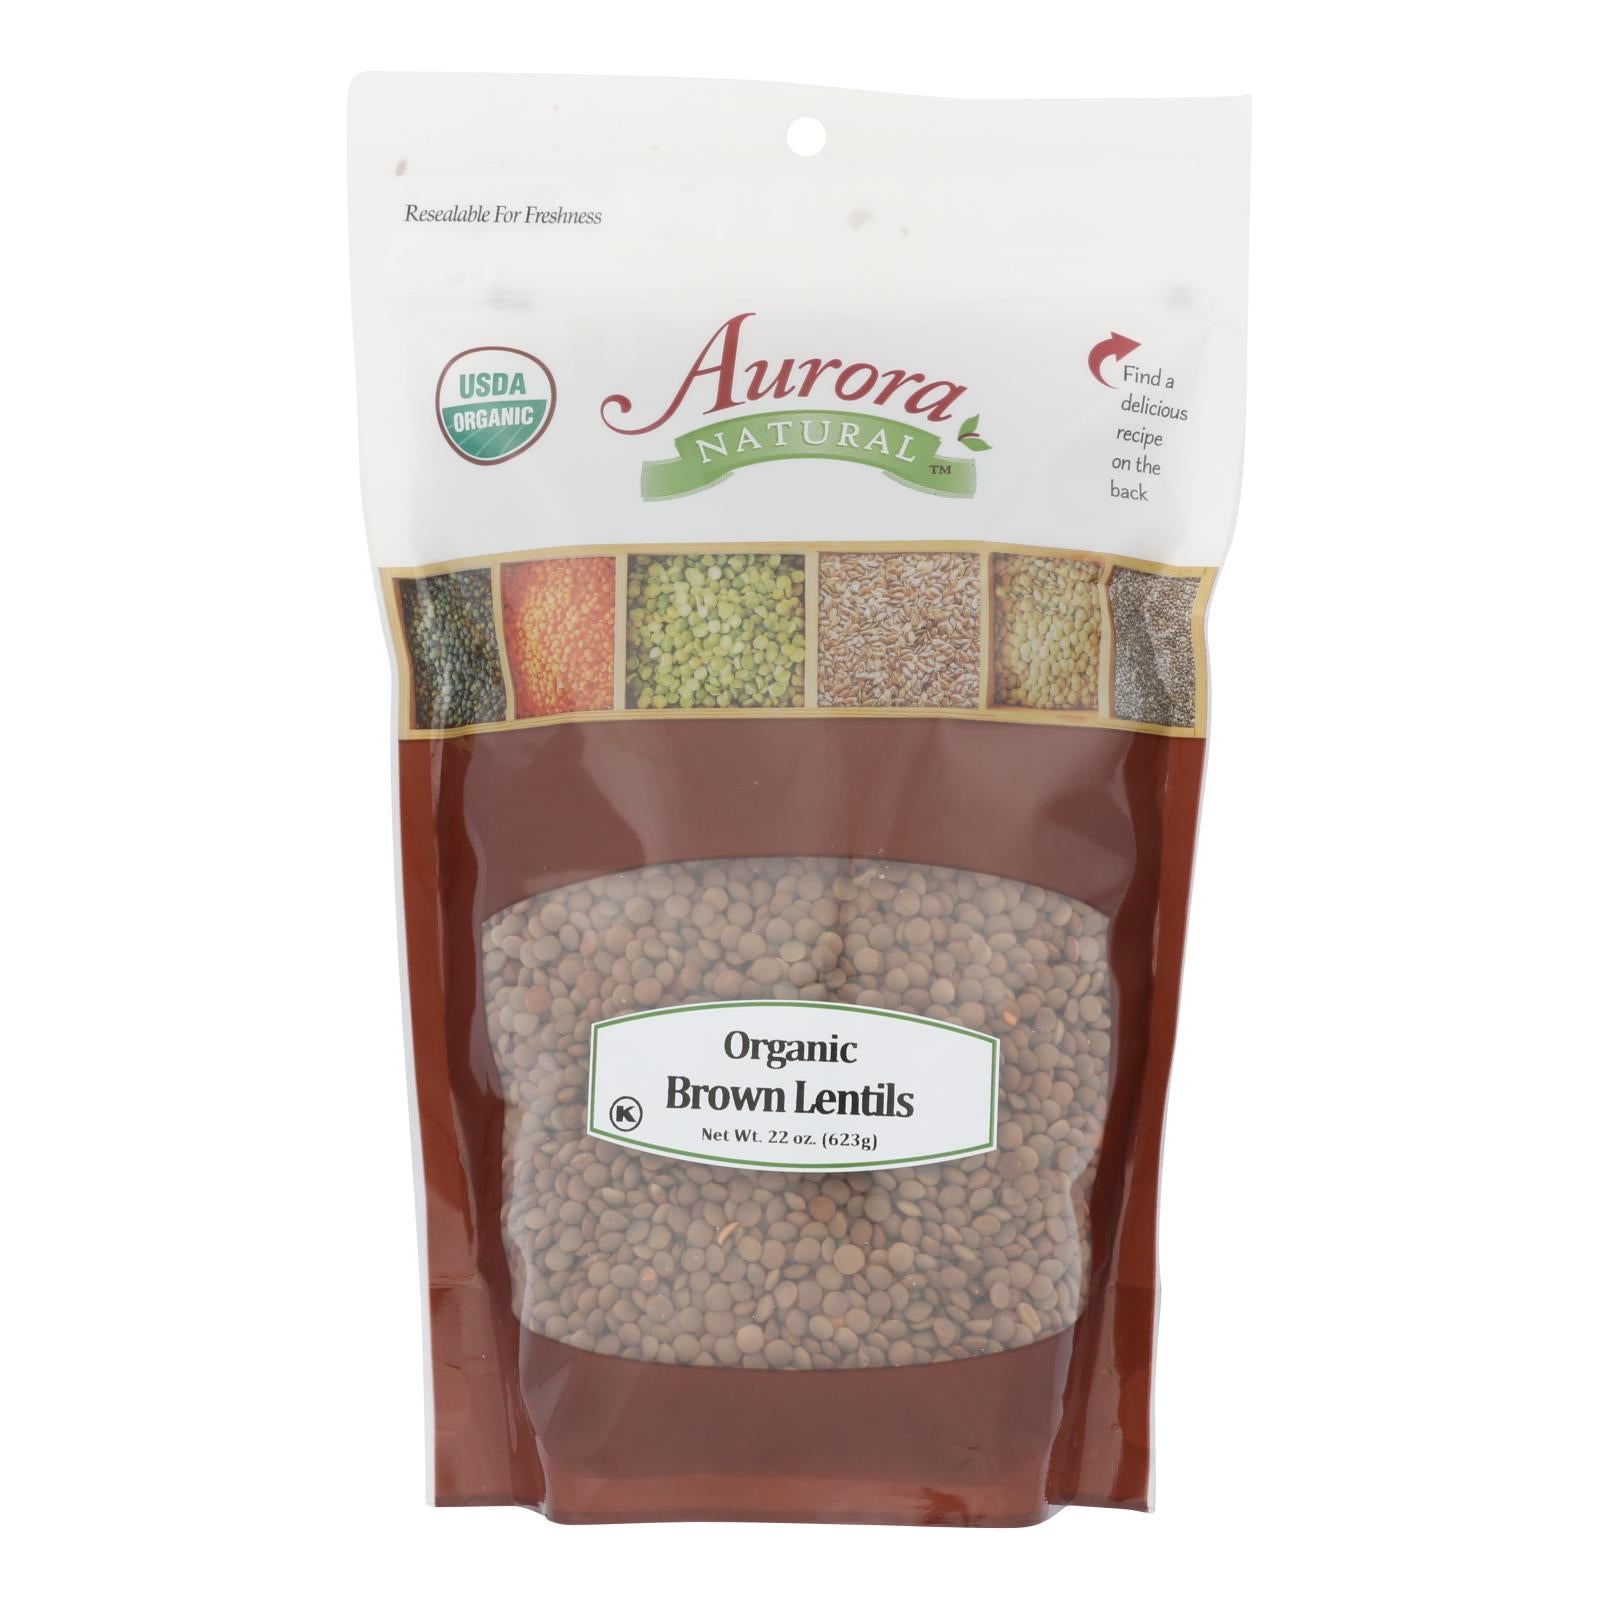 Aurora Natural Products, Aurora Natural Products - Organic Brown Lentils - Case of 10 - 22 oz. (Pack of 10)